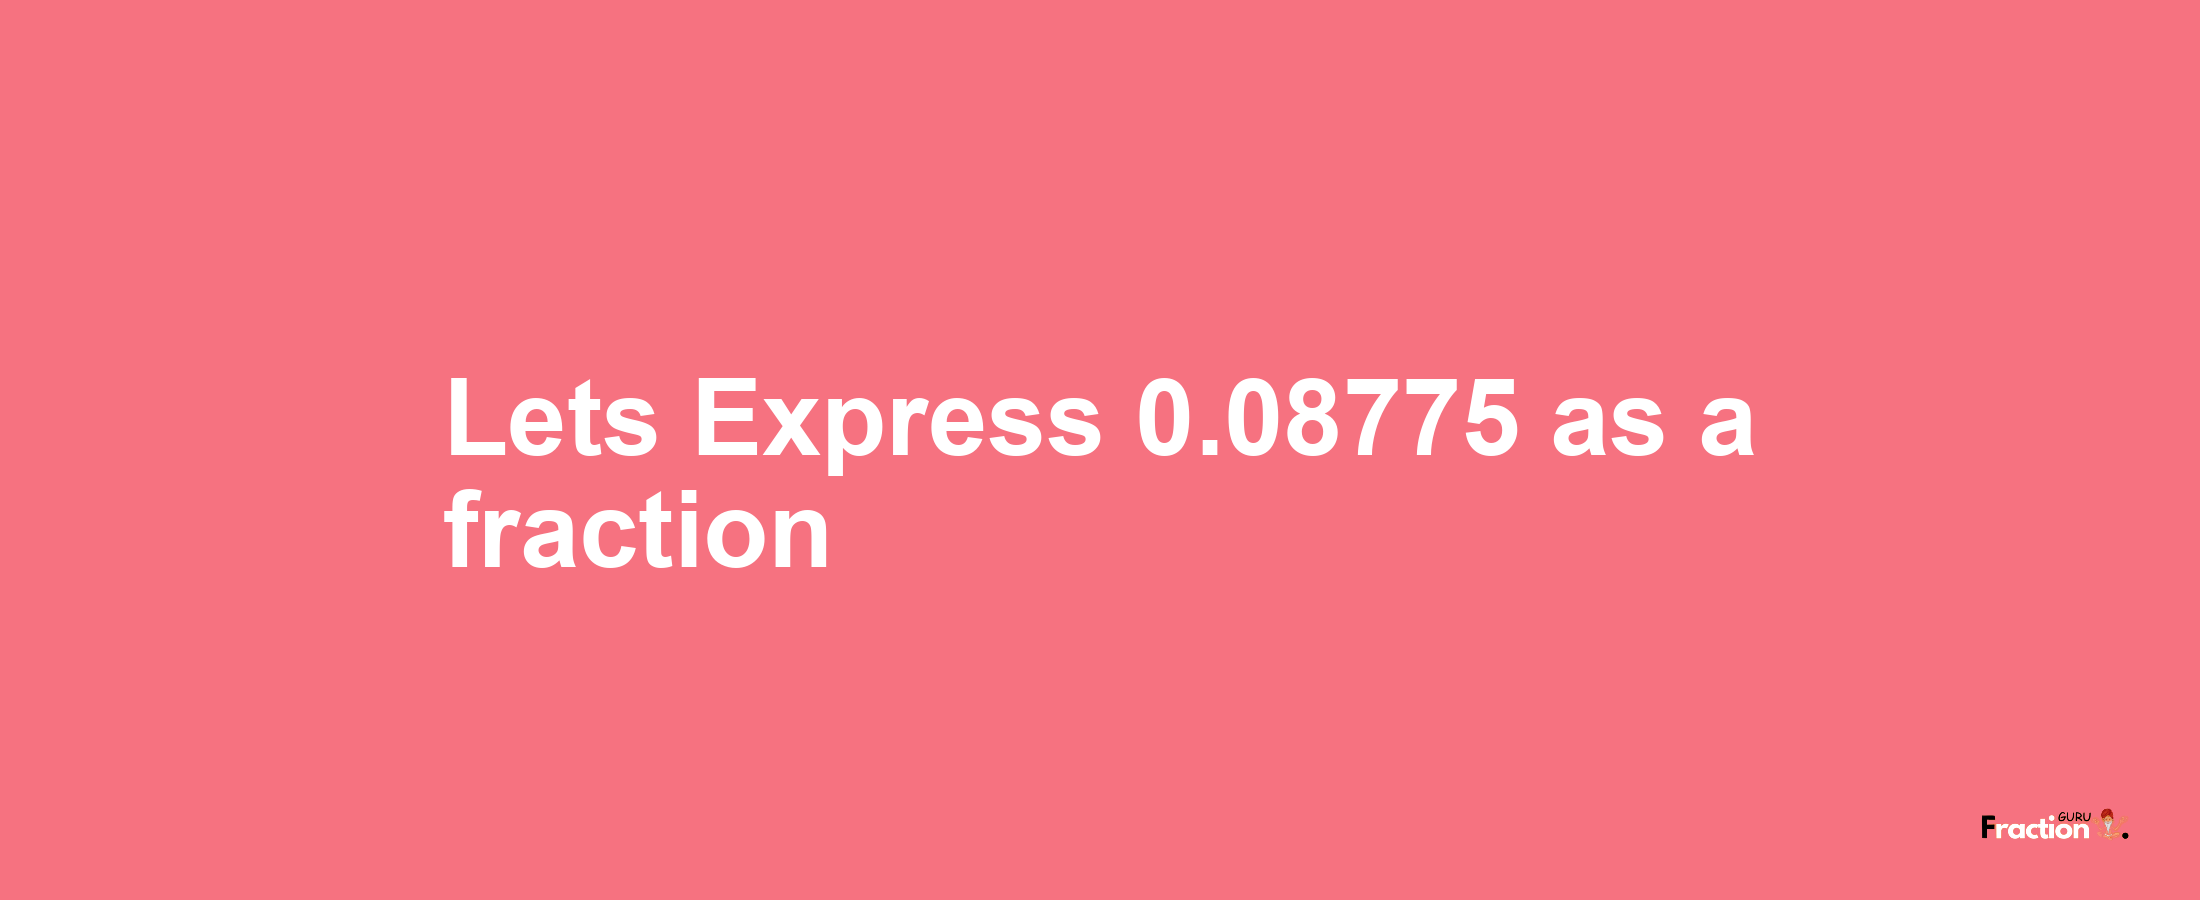 Lets Express 0.08775 as afraction